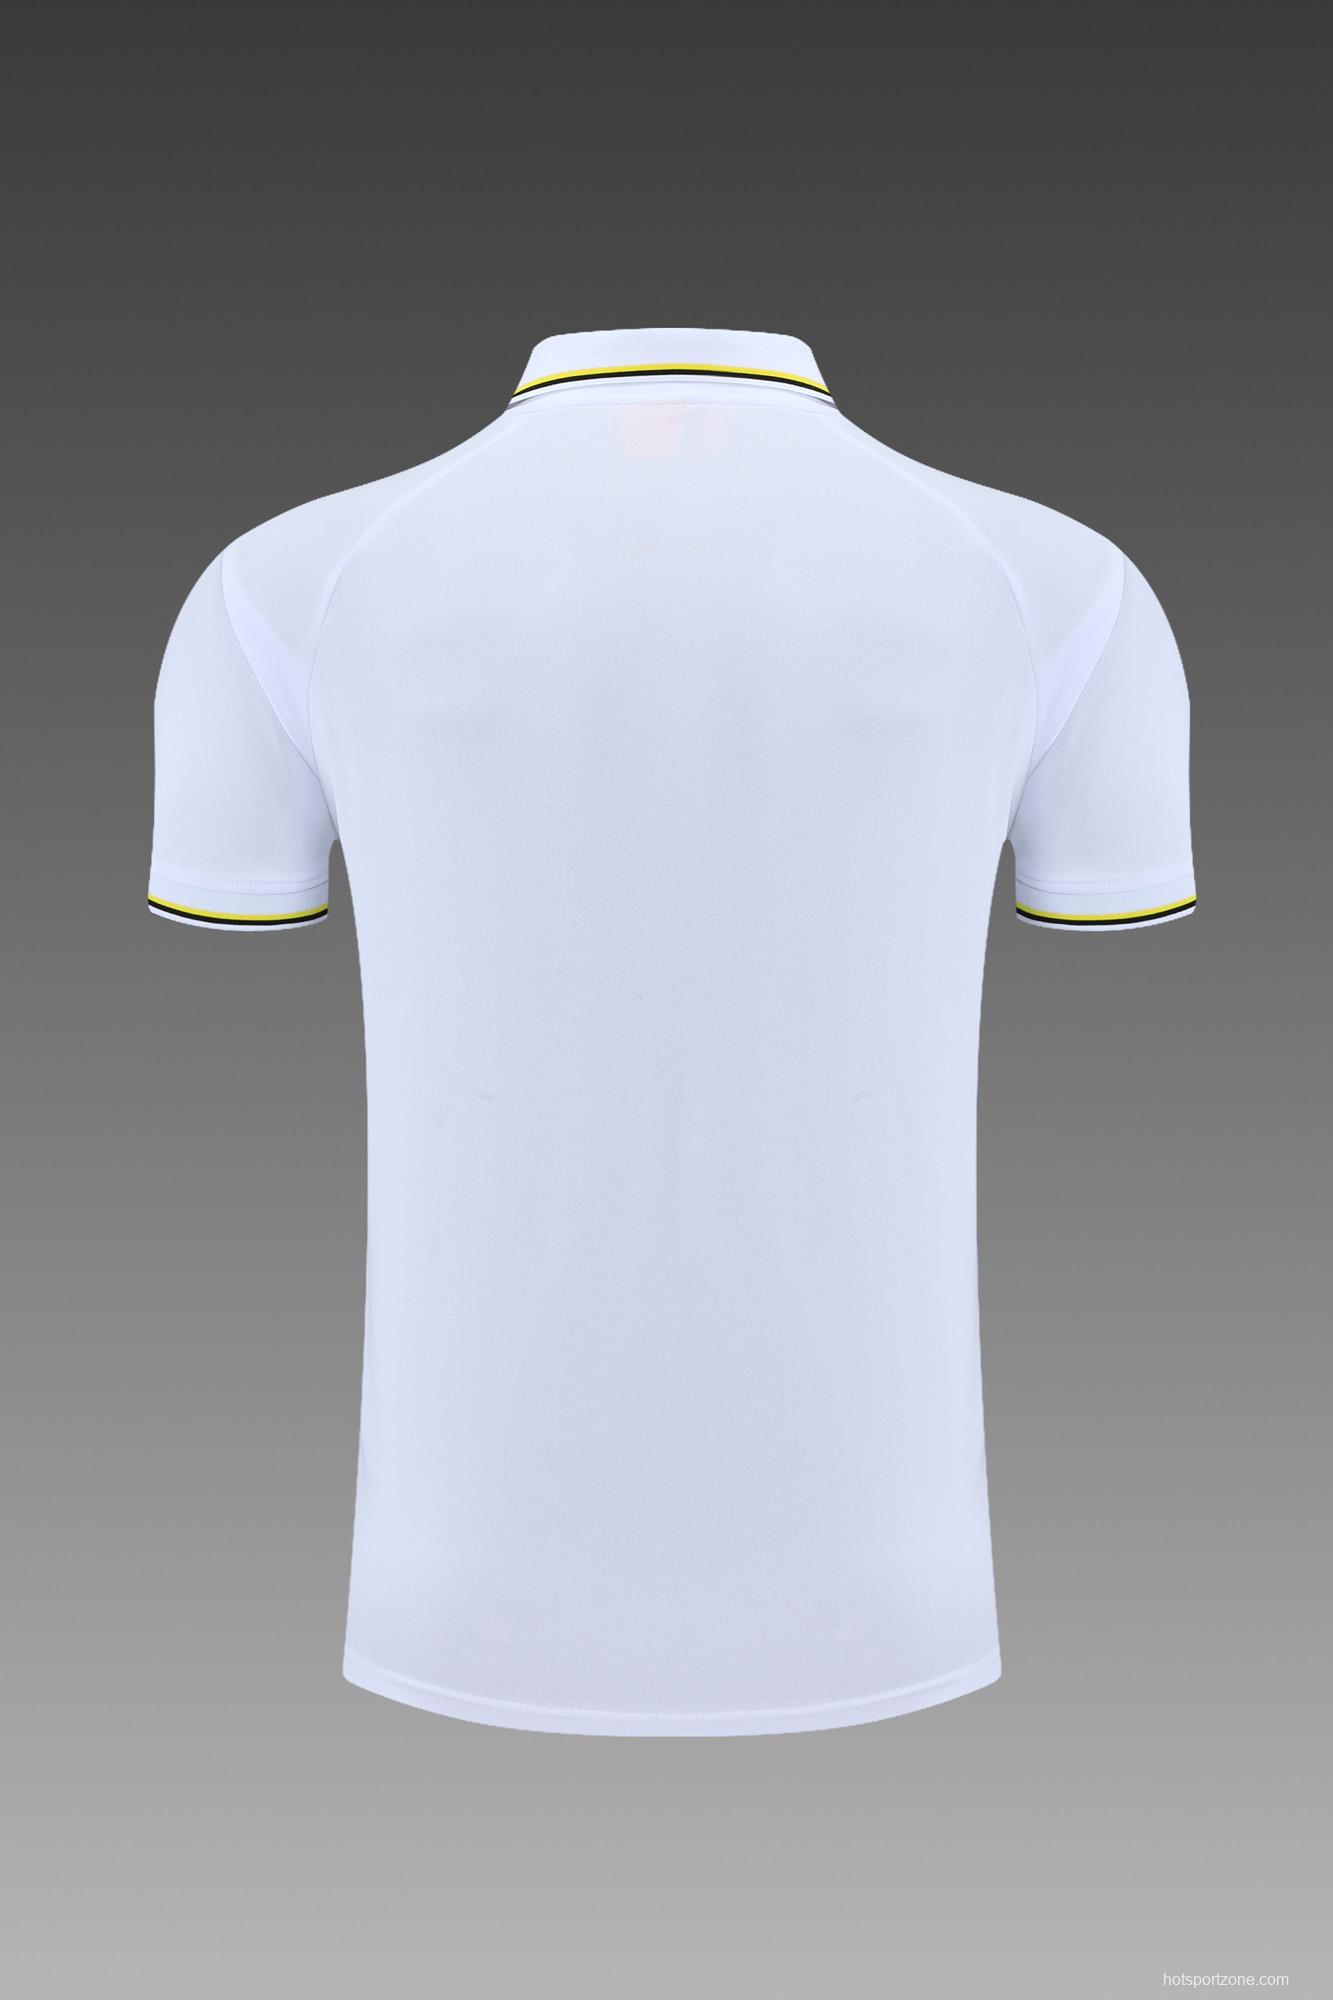 Borussia Dortmund POLO kit White and green pattern (not supported to be sold separately)